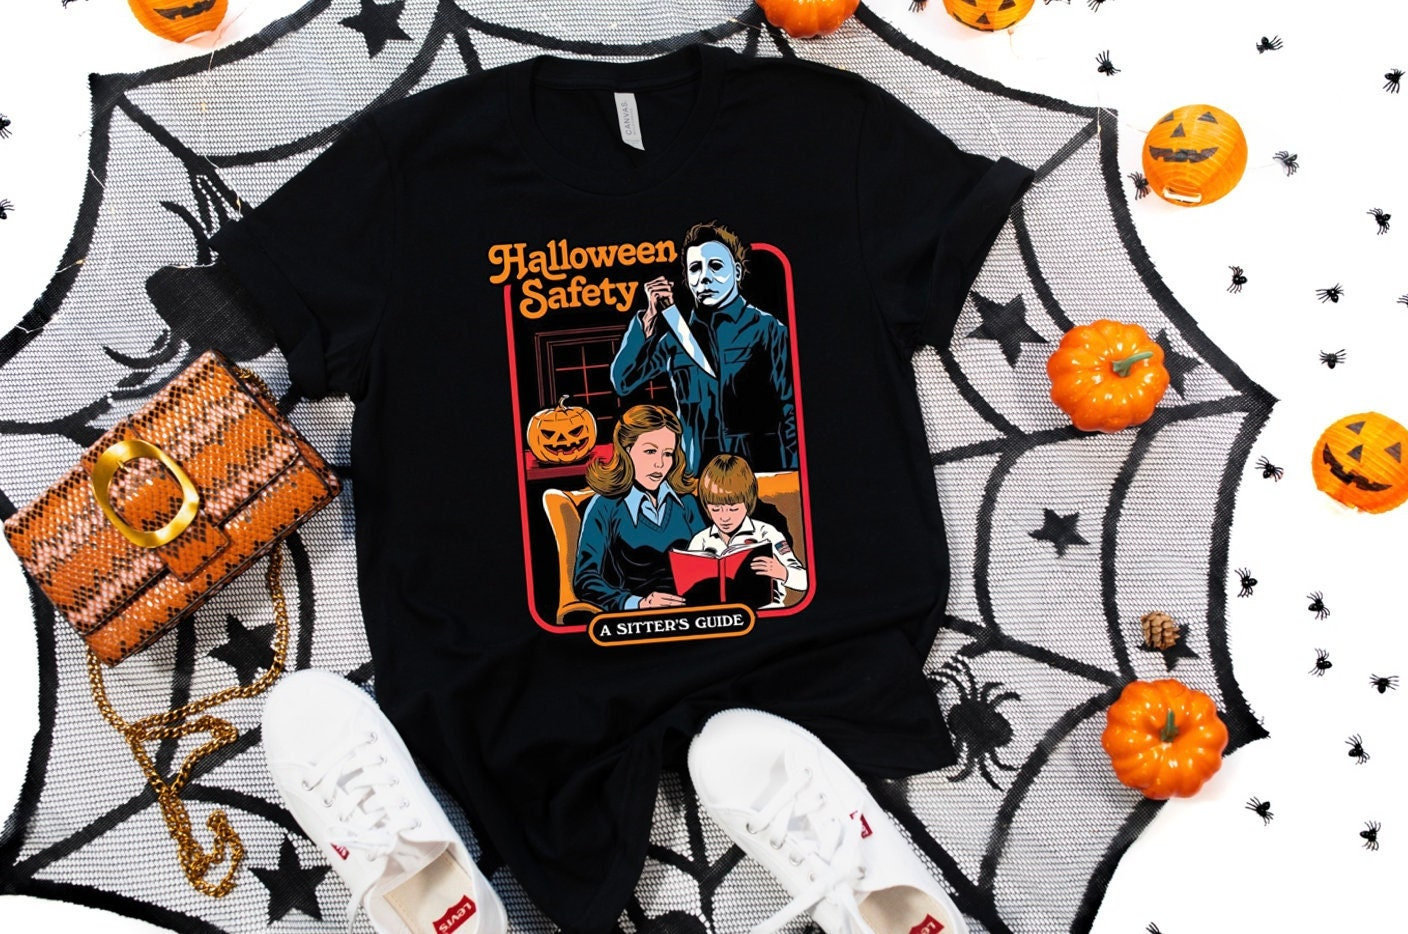 Discover Maglietta T-Shirt Michael Myers - Halloween Safety Horror Movie